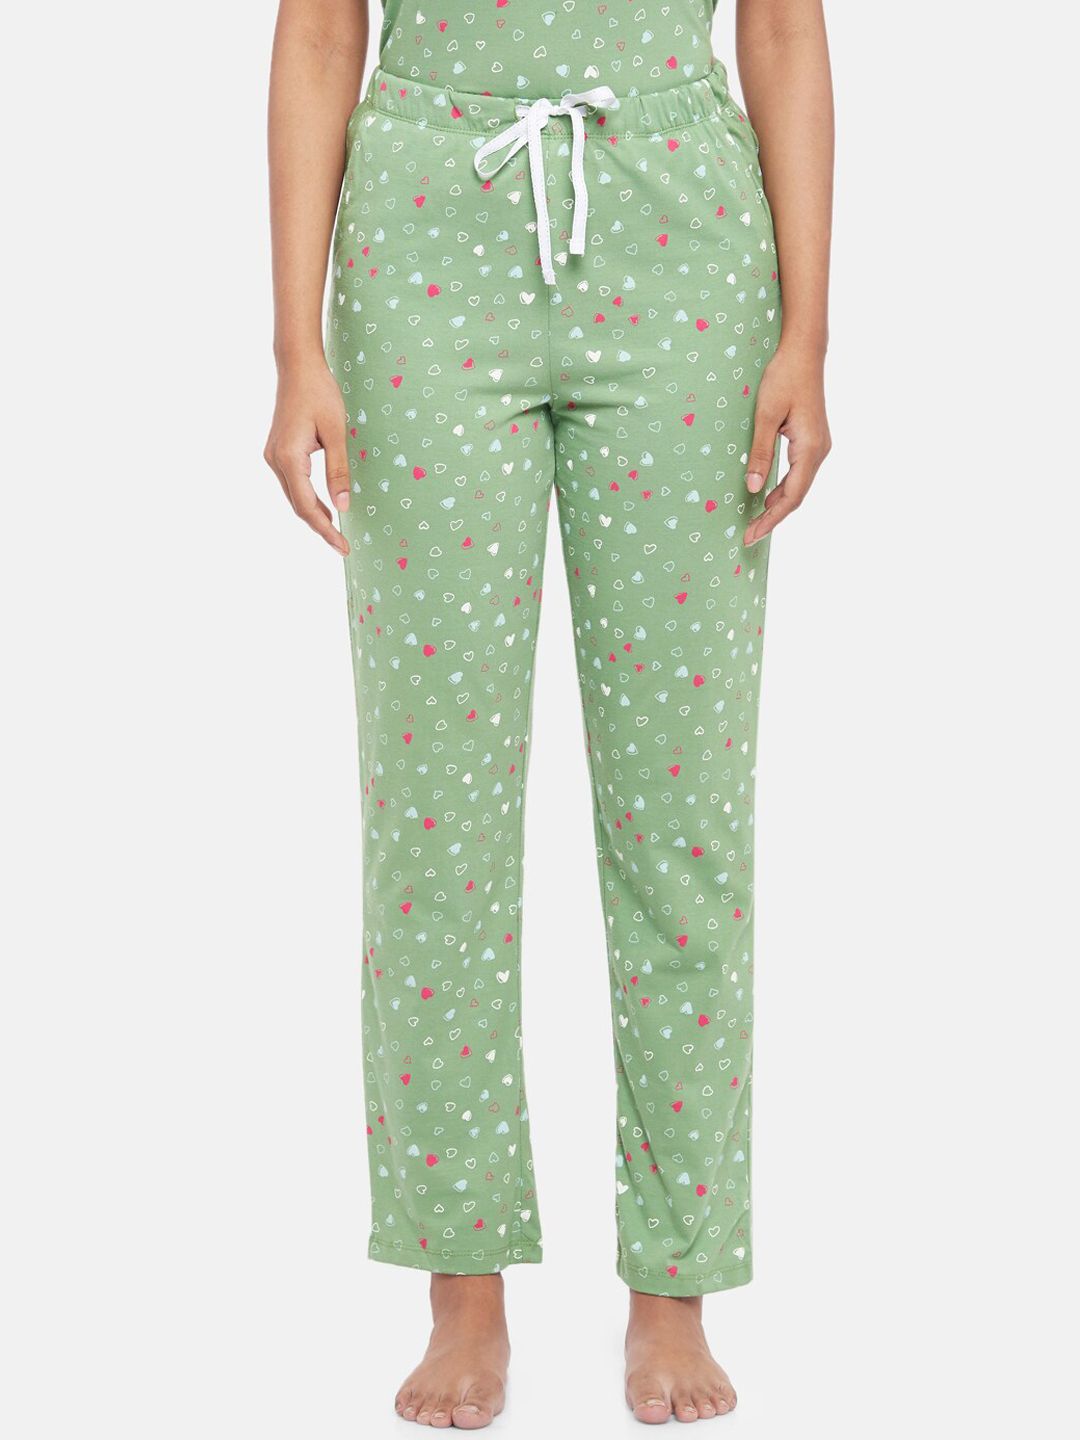 Dreamz by Pantaloons Green Heart Printed Lounge Pants Price in India